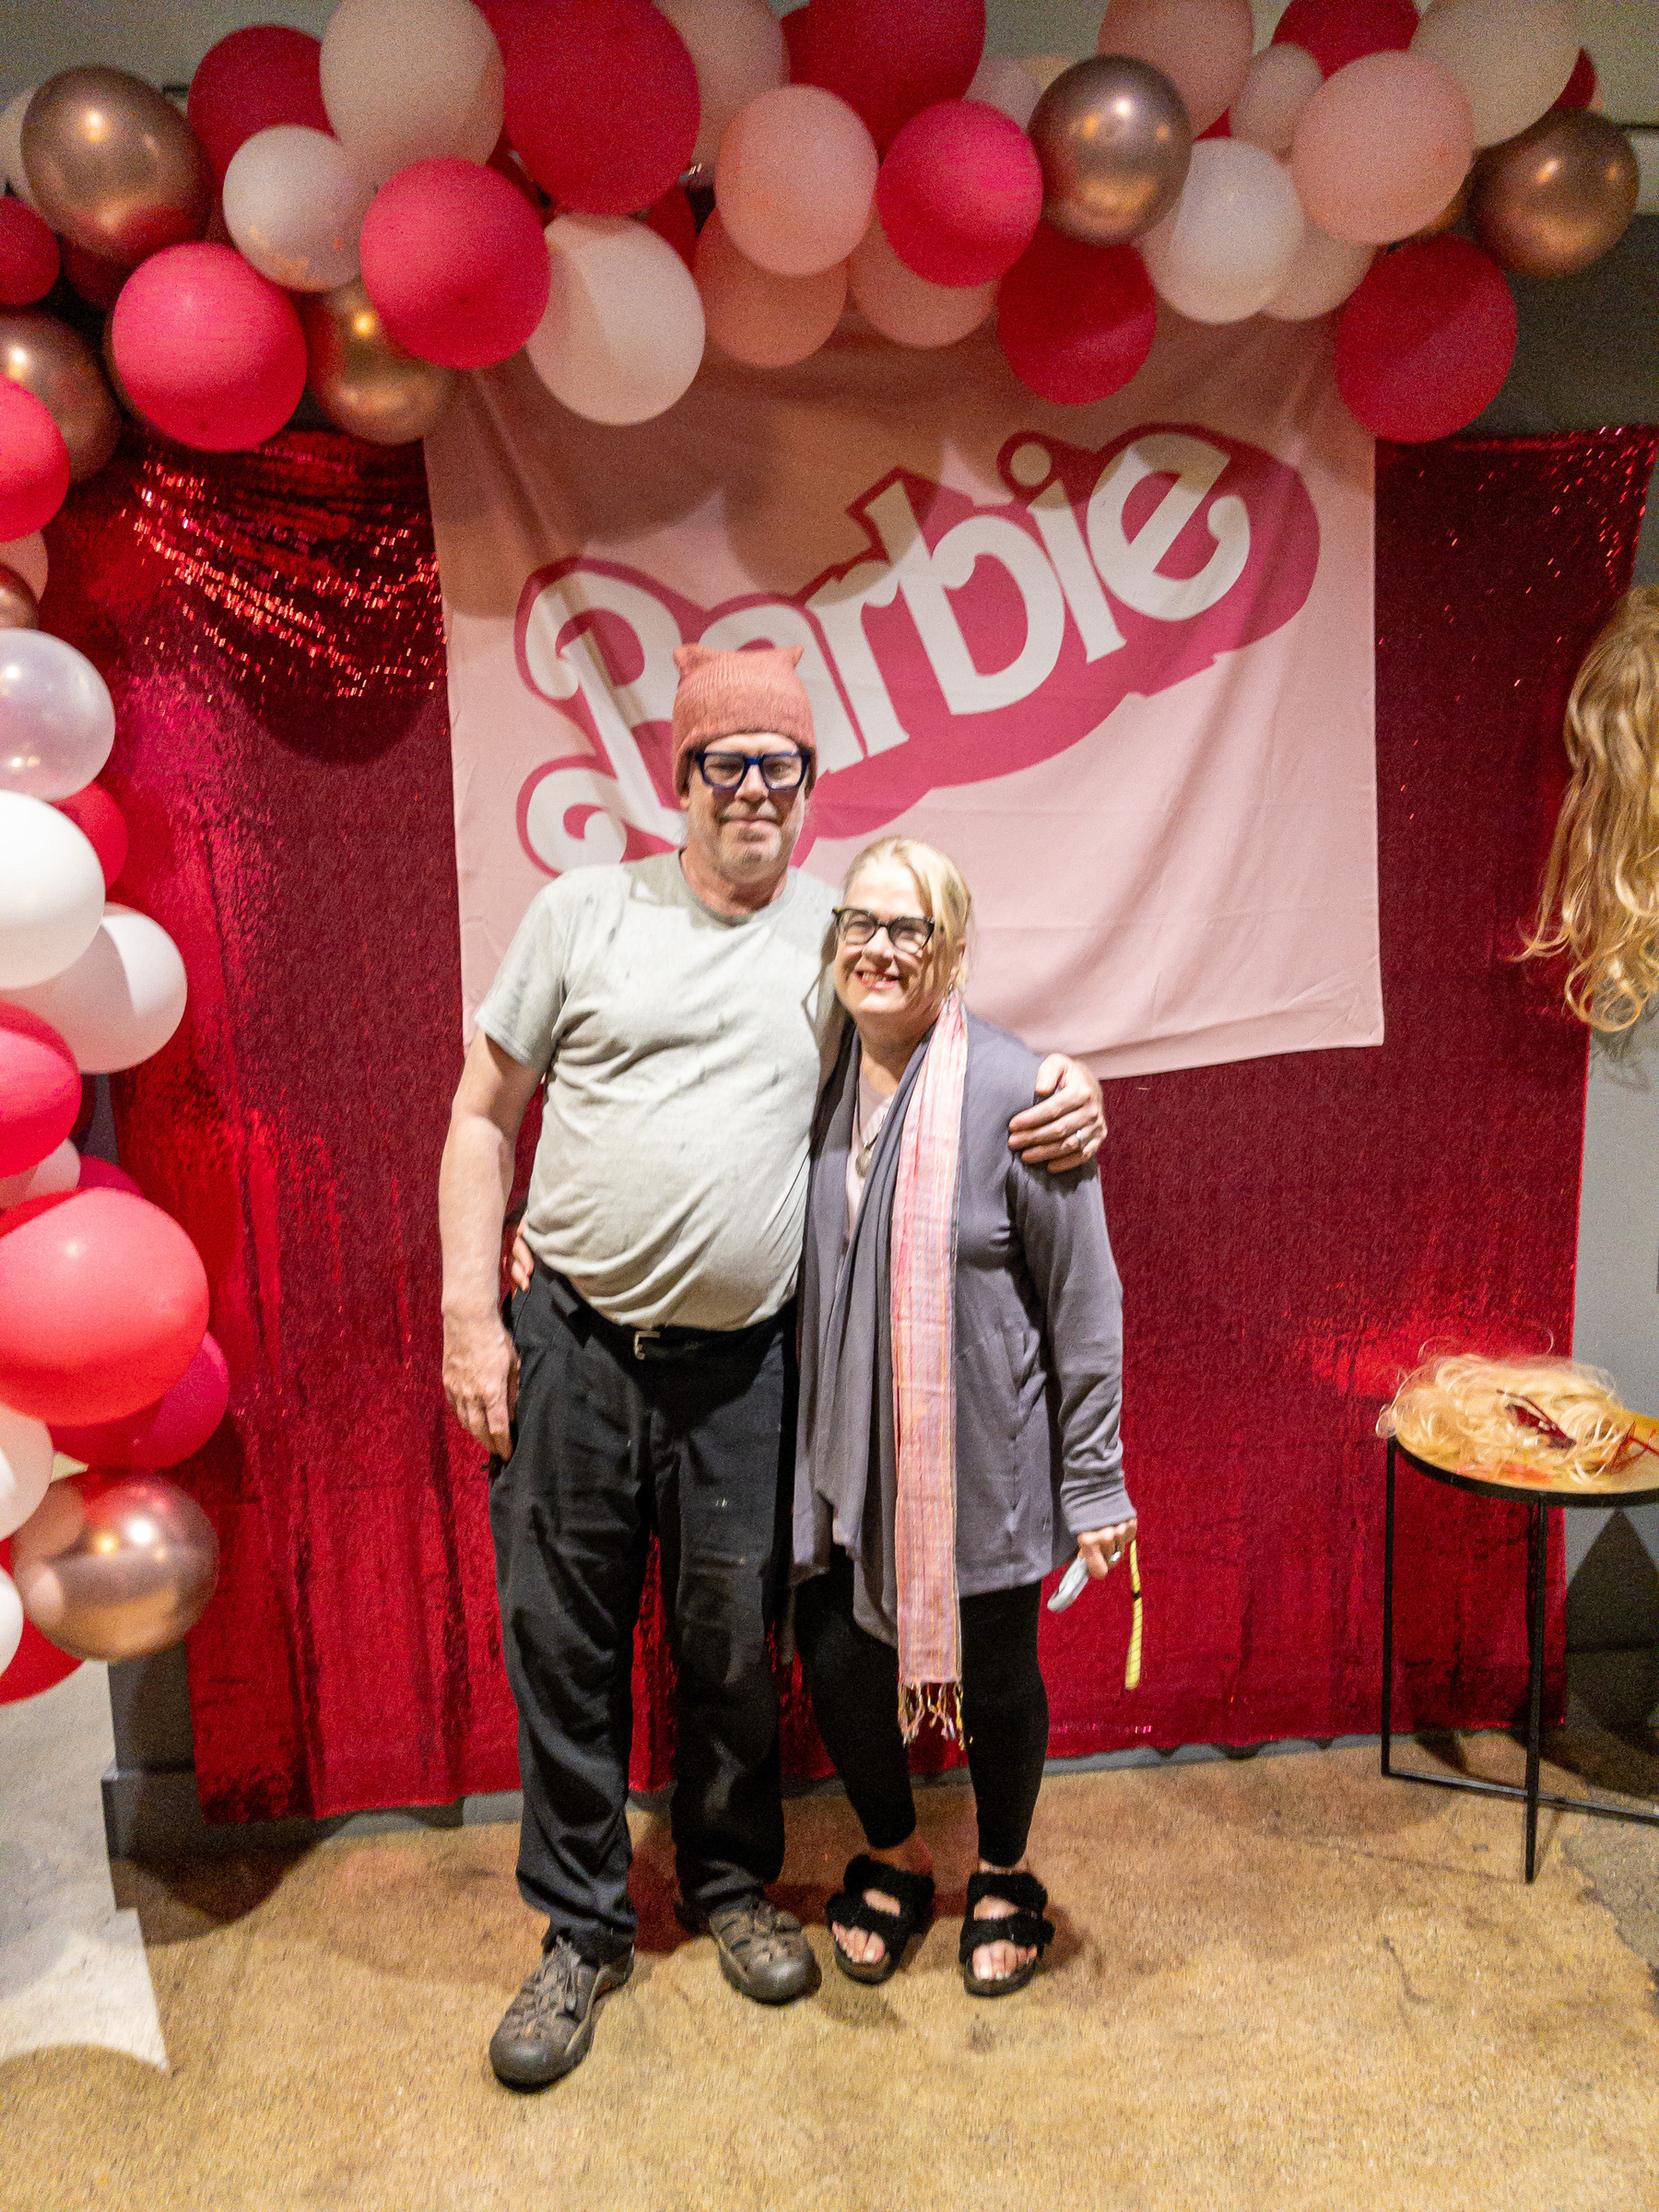 Man and woman standing in front of Barbie sign and balloons.